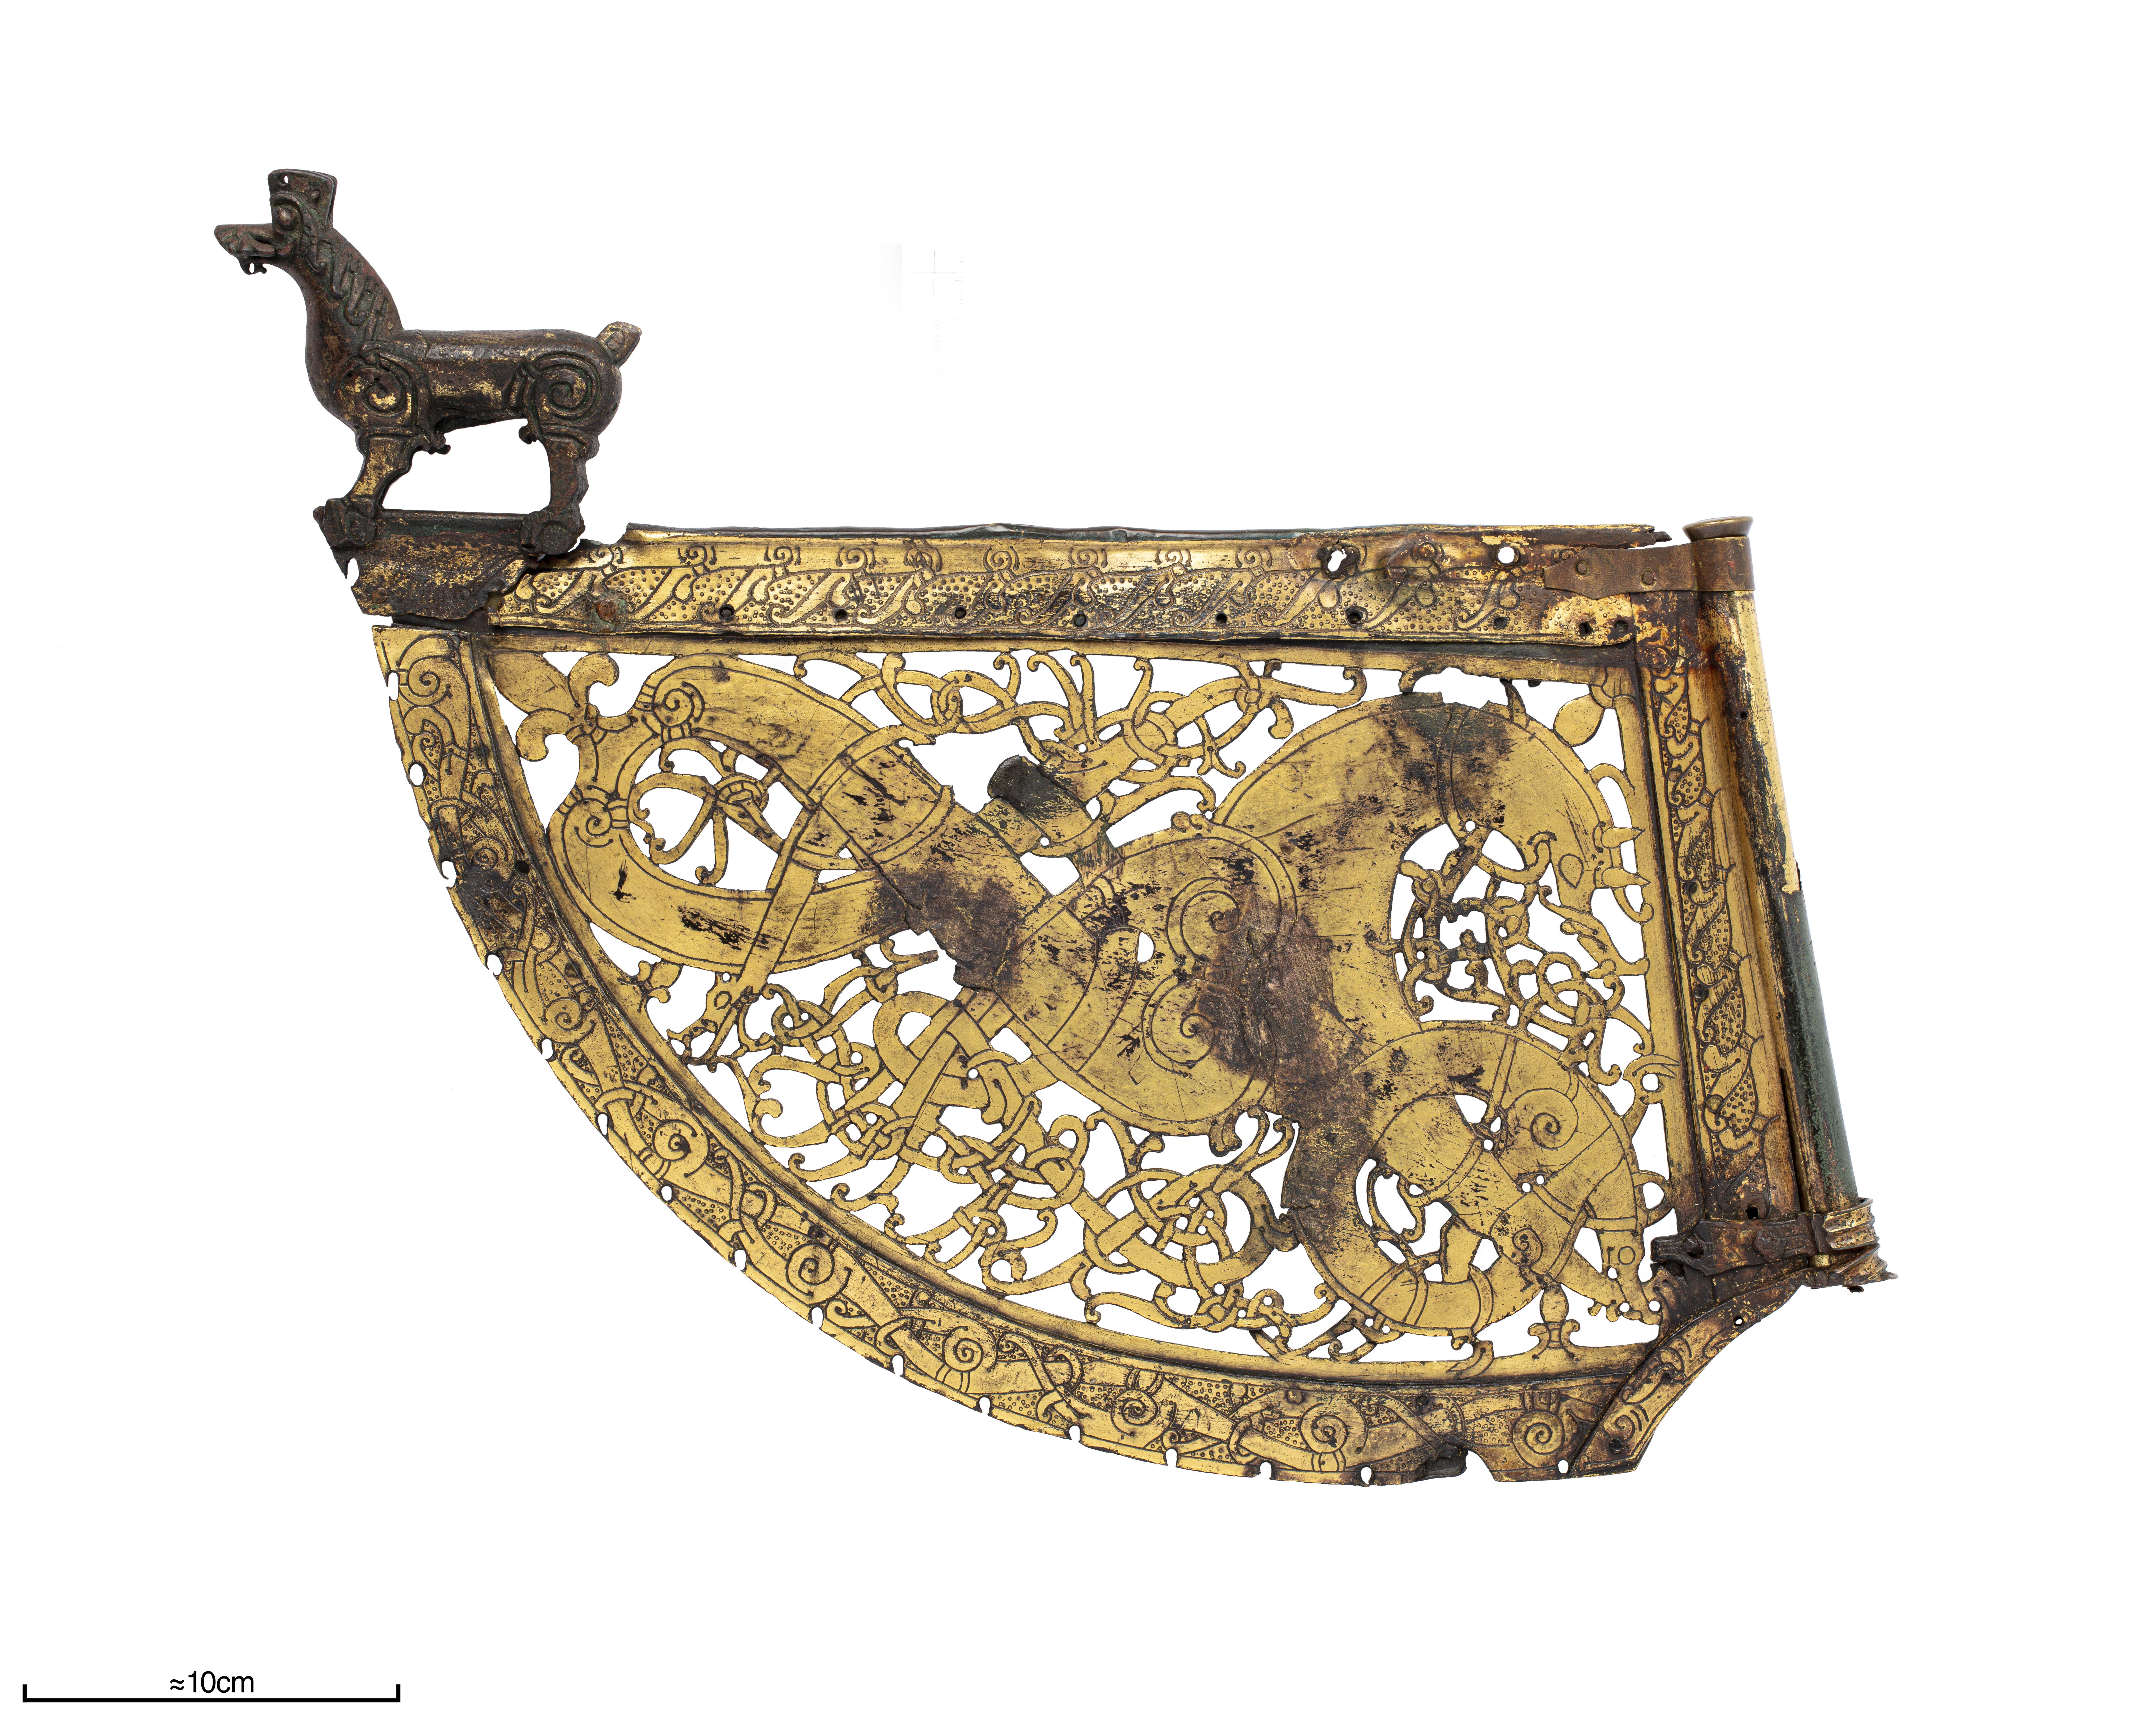 The Söderala vane. A highly ornamented viking era weather vane made from gilded bronze and with intricate openwork. Found in Sweden with possibly British origins and dated to ~1050 AD.jpg